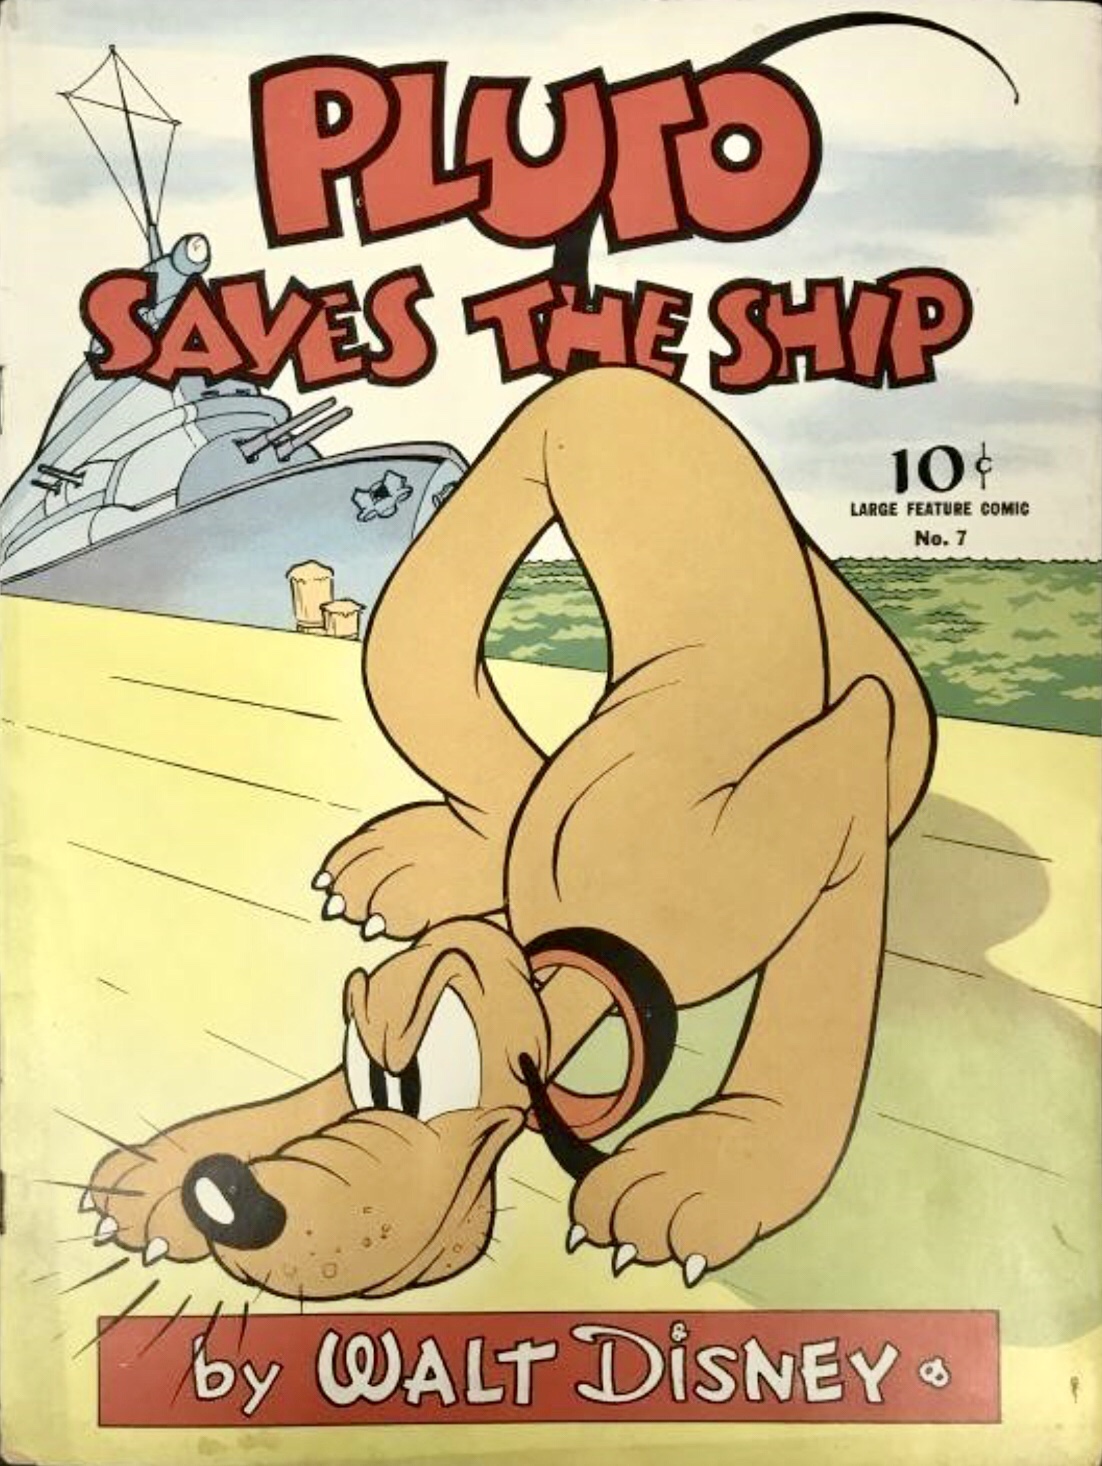 Omslag till Large Feature Comic #7 med Pluto Saves the Ship (1942). ©Western/Disney